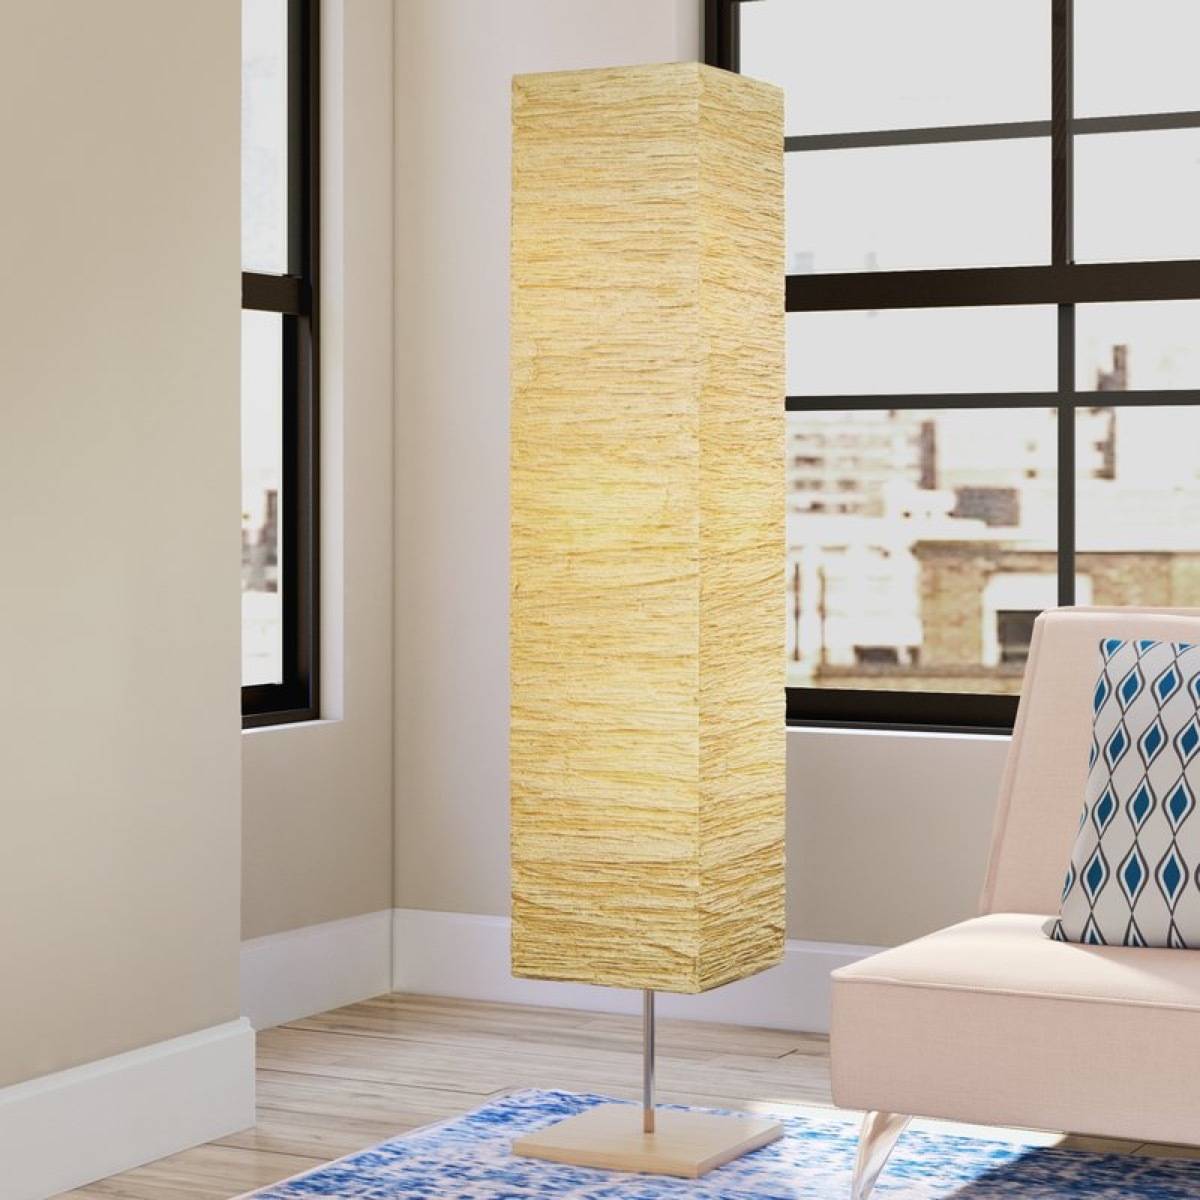 Toombs column floor lamp from All Modern